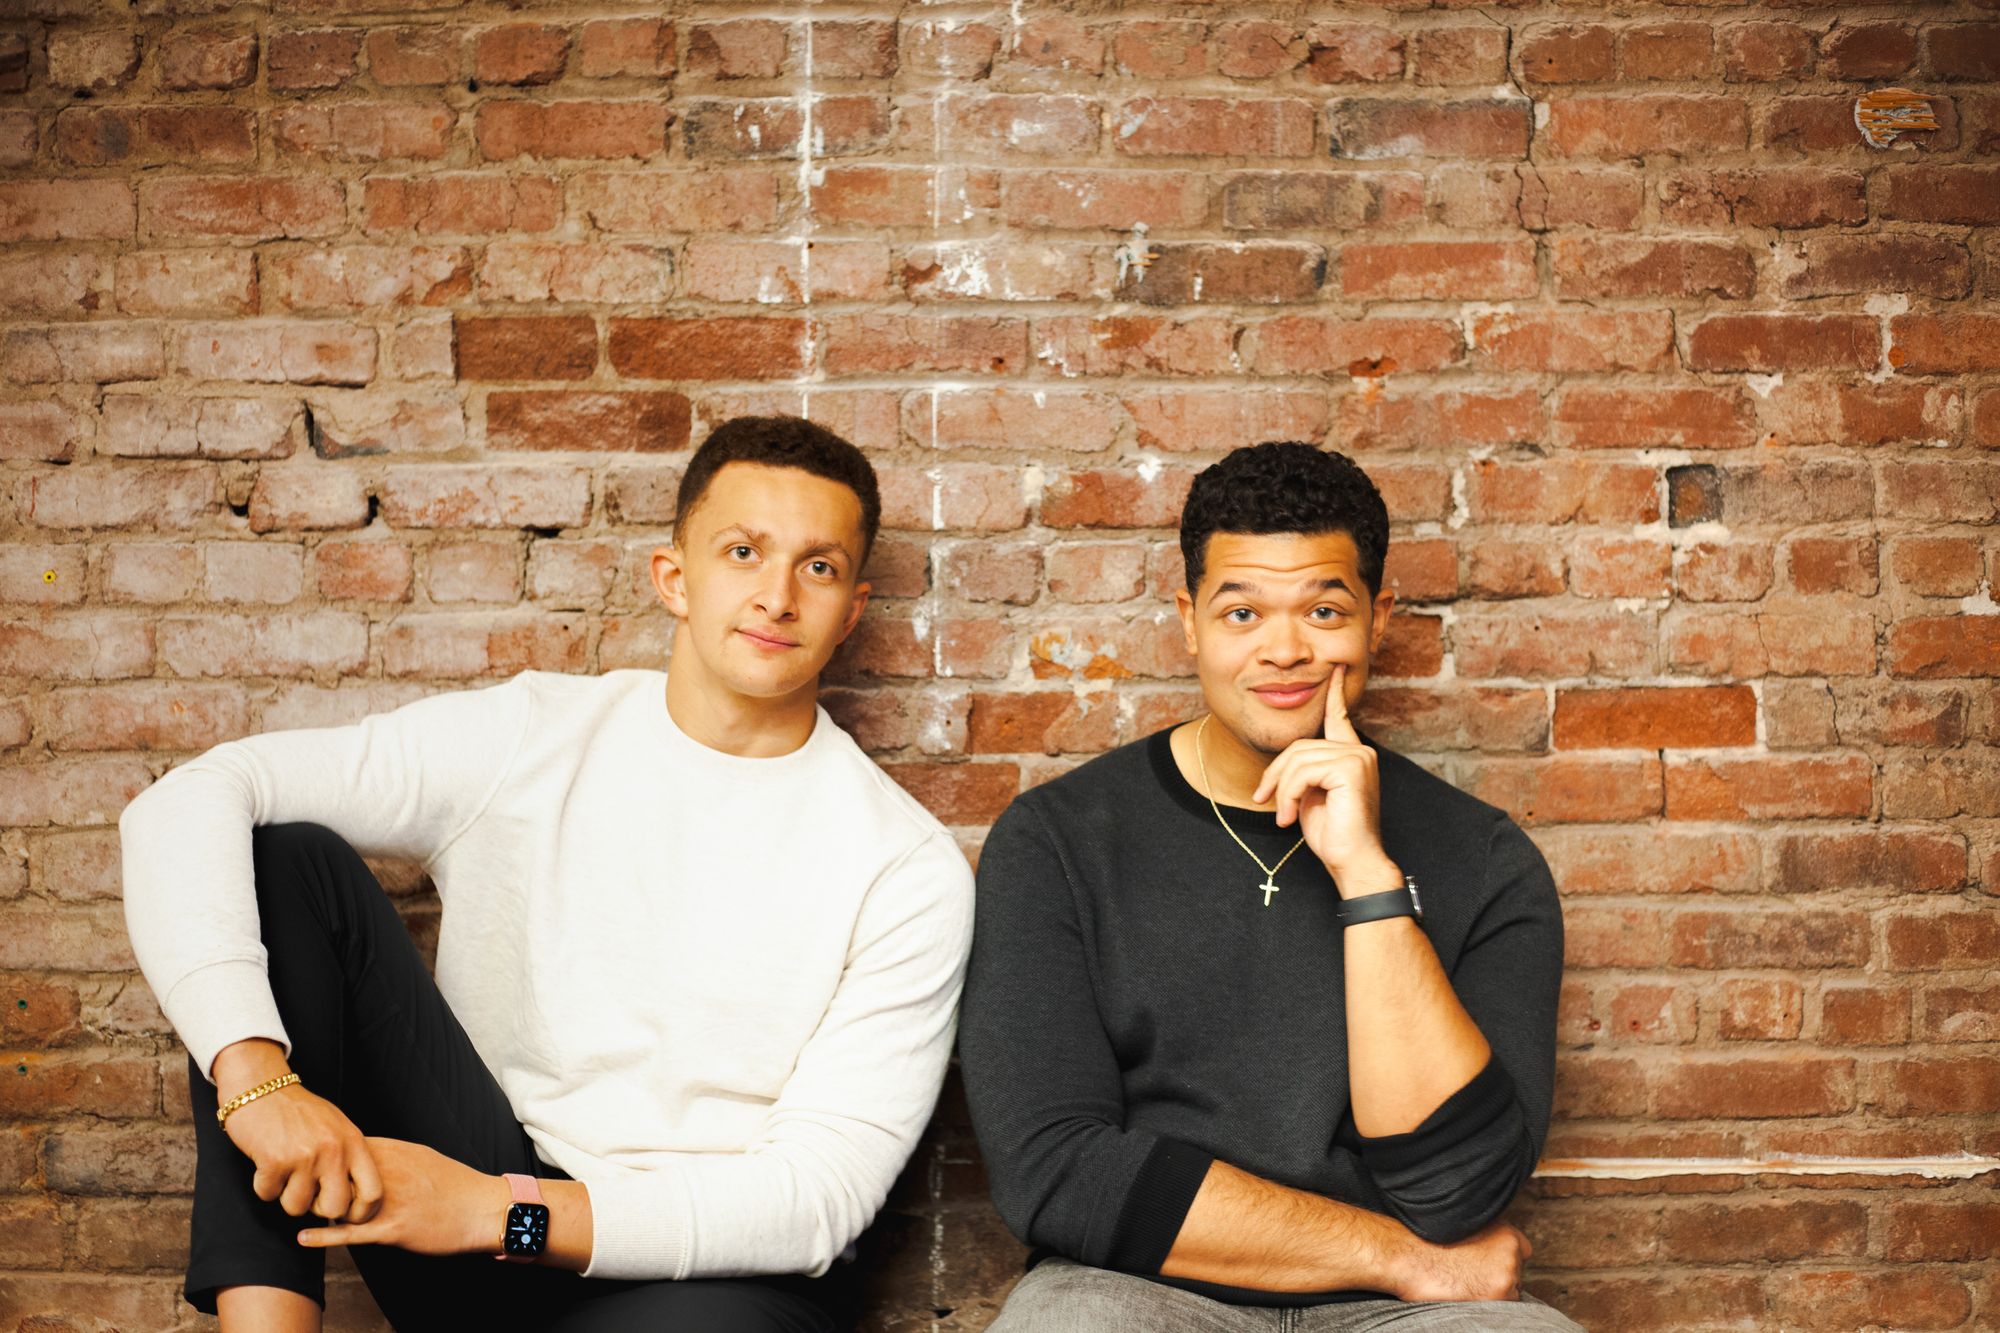 The cofounders of Lendtable on finding product-market fit & acquiring customers